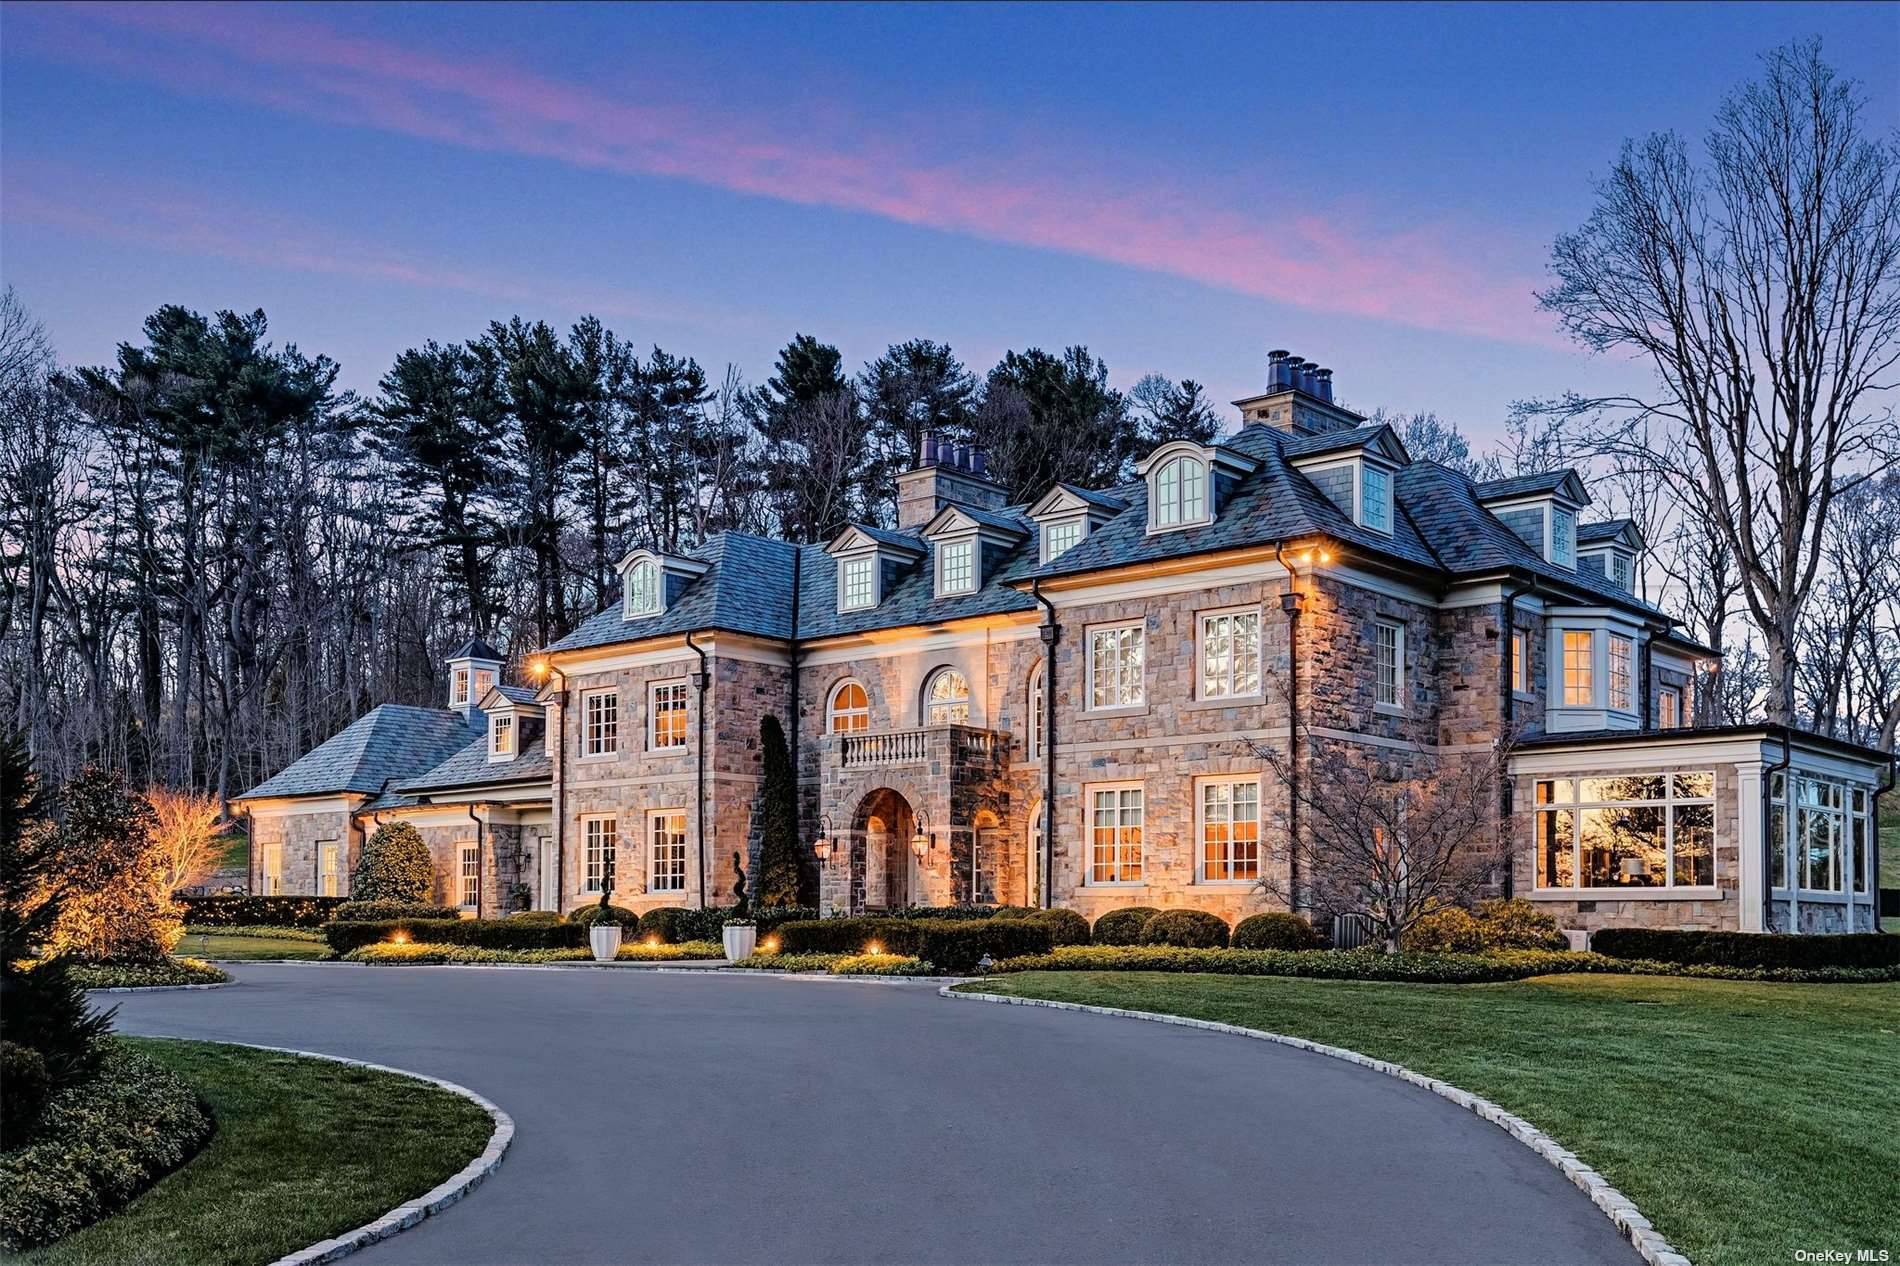 Newly constructed elegant stone manor home situated in the heart of Spring Hill, Old Westbury's most exclusive address in the Wheatley schools.